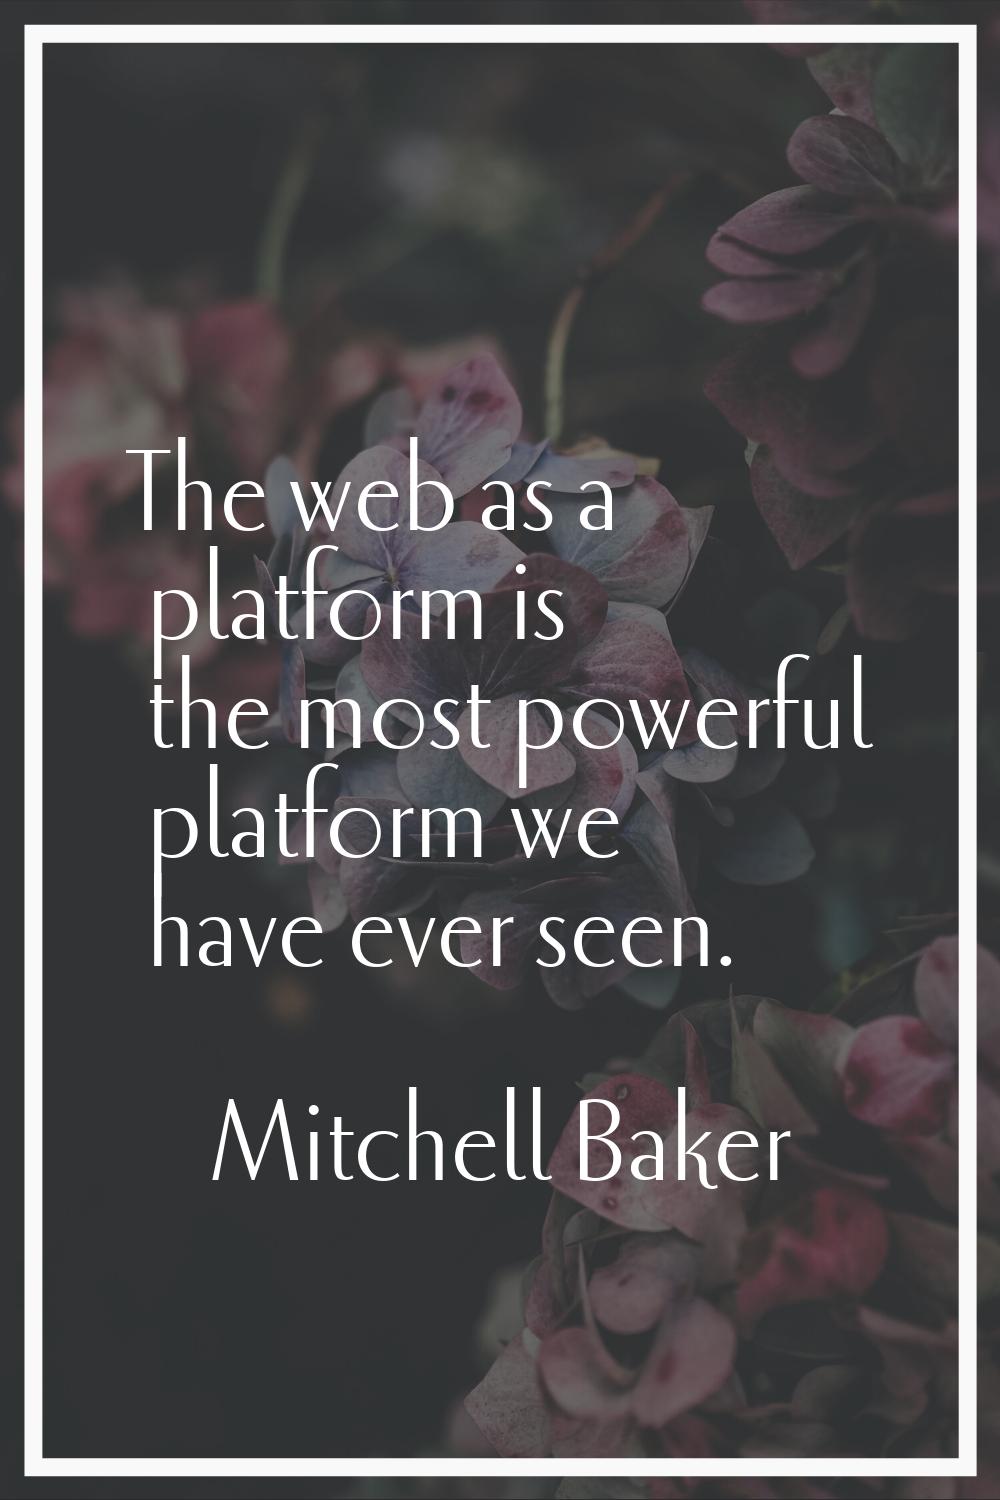 The web as a platform is the most powerful platform we have ever seen.